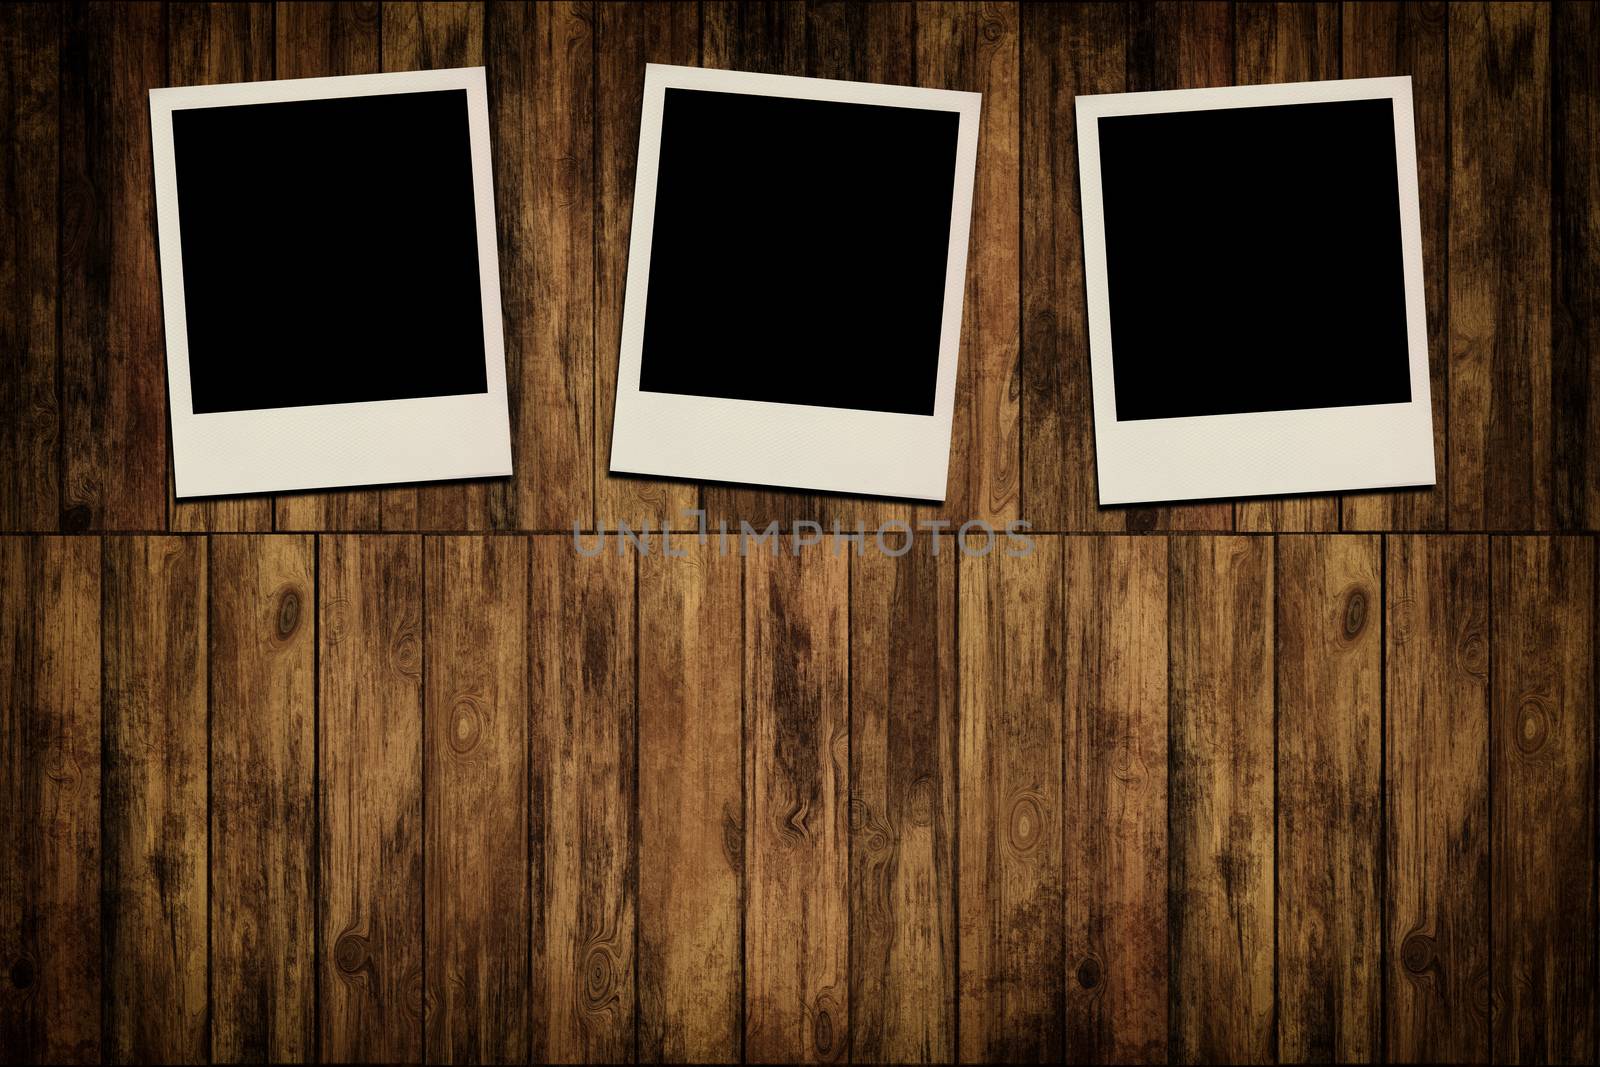 Blank instant photo frames on old wooden background